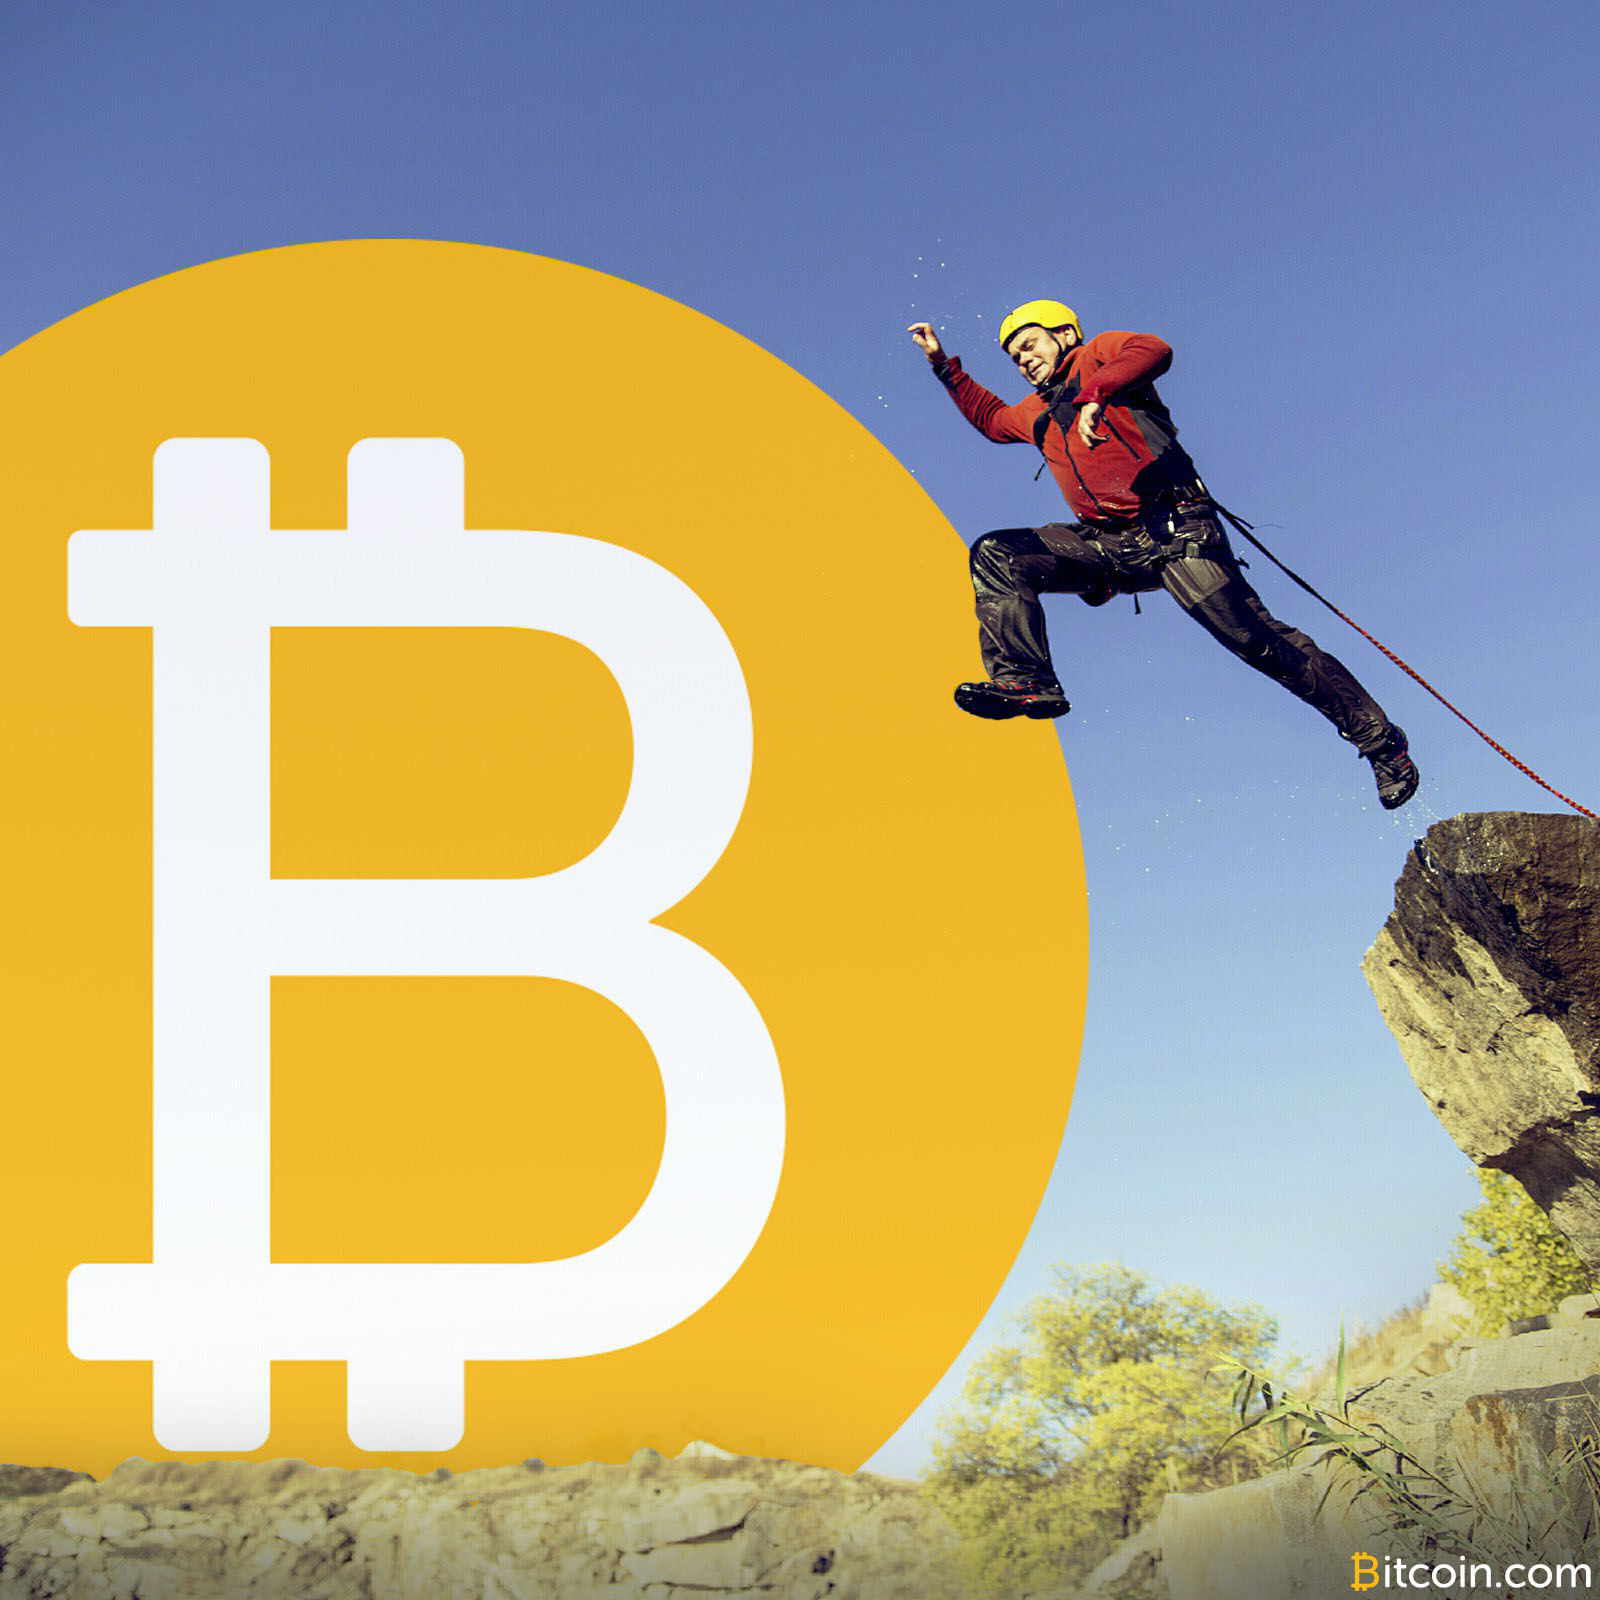 Markets Update: Bitcoin Price Drops a Touch After Reaching New Highs